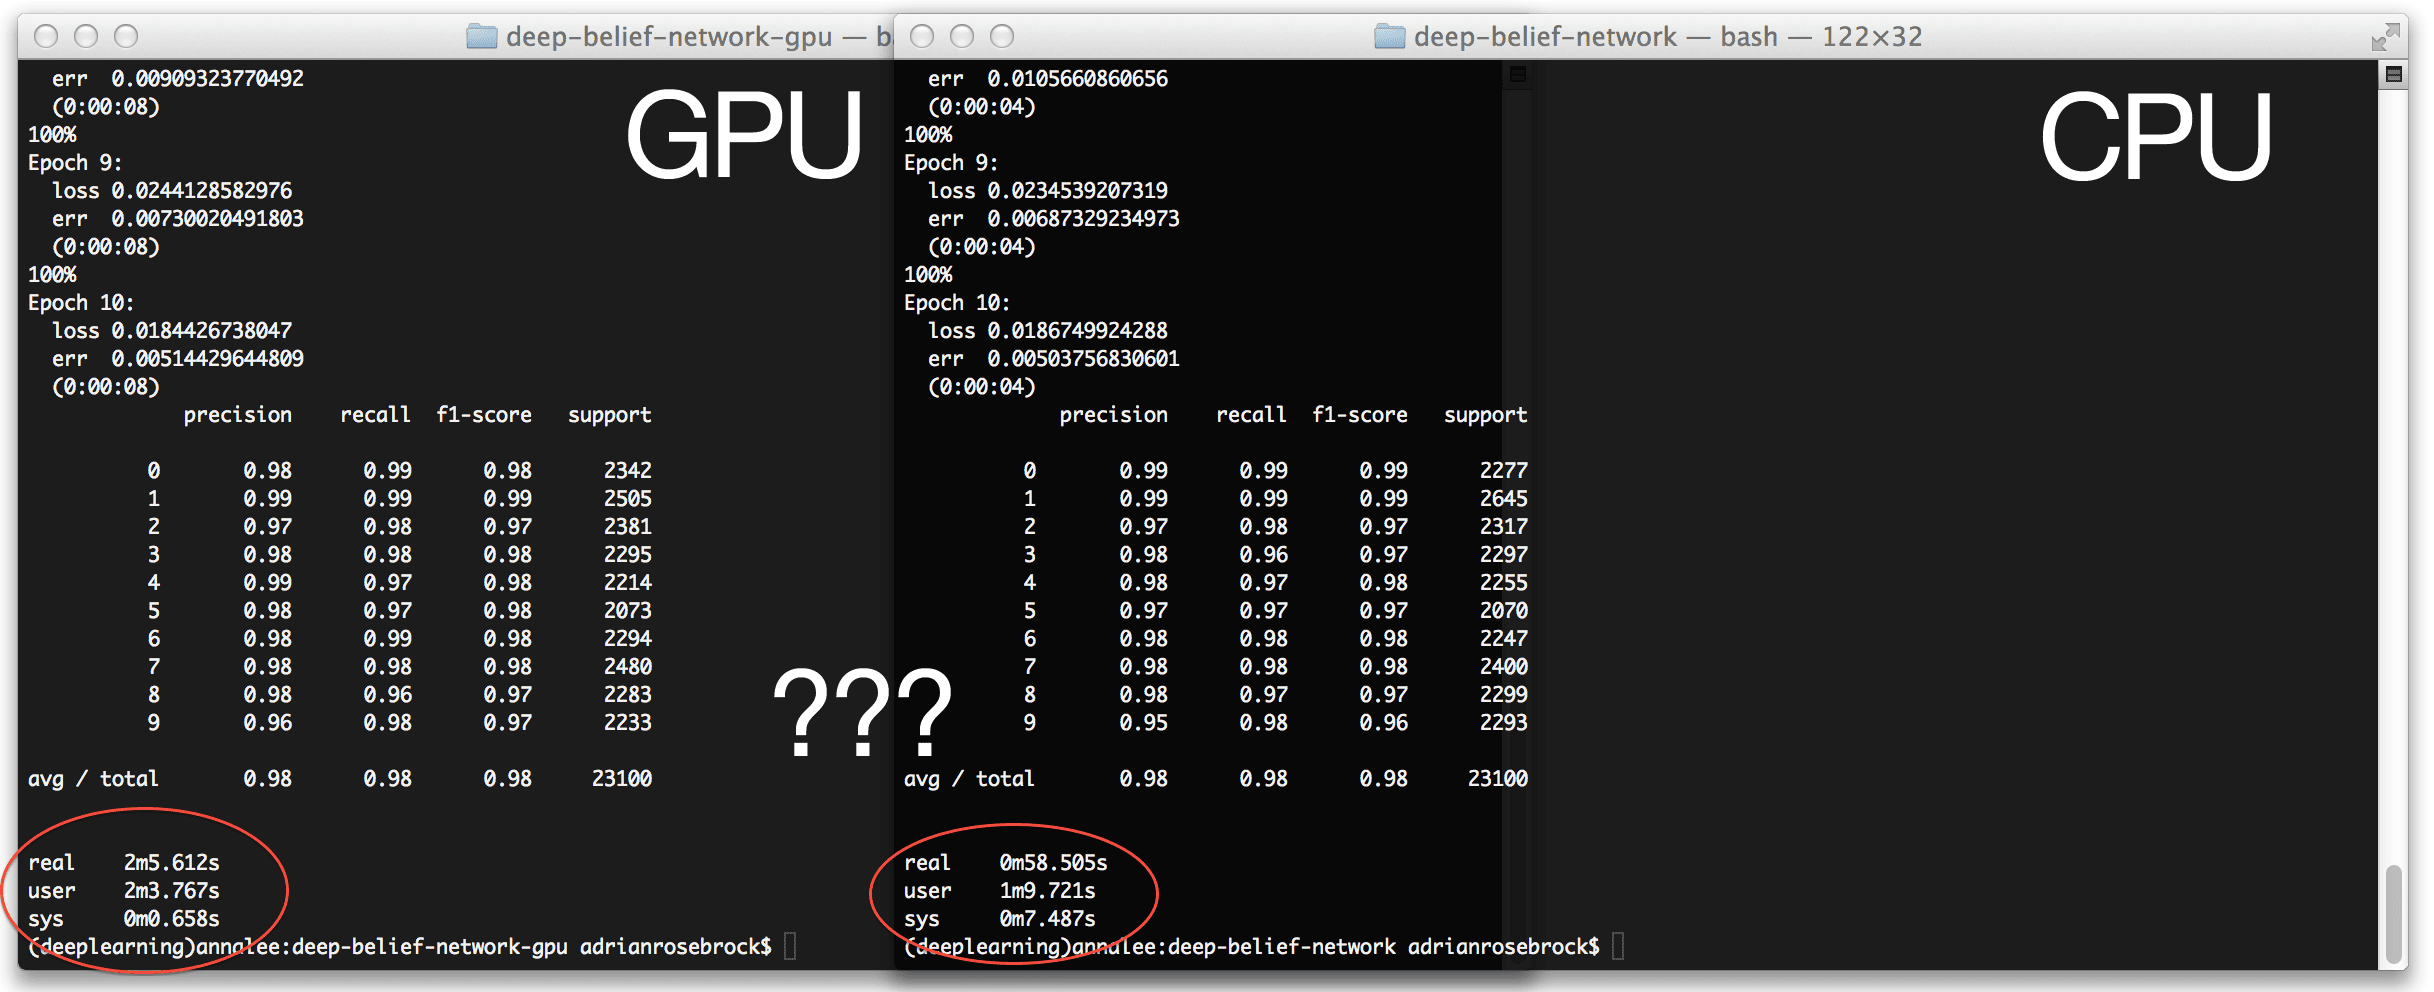 My GPU vs. CPU performance training a Deep Belief Network. For some reason the CPU is faster.